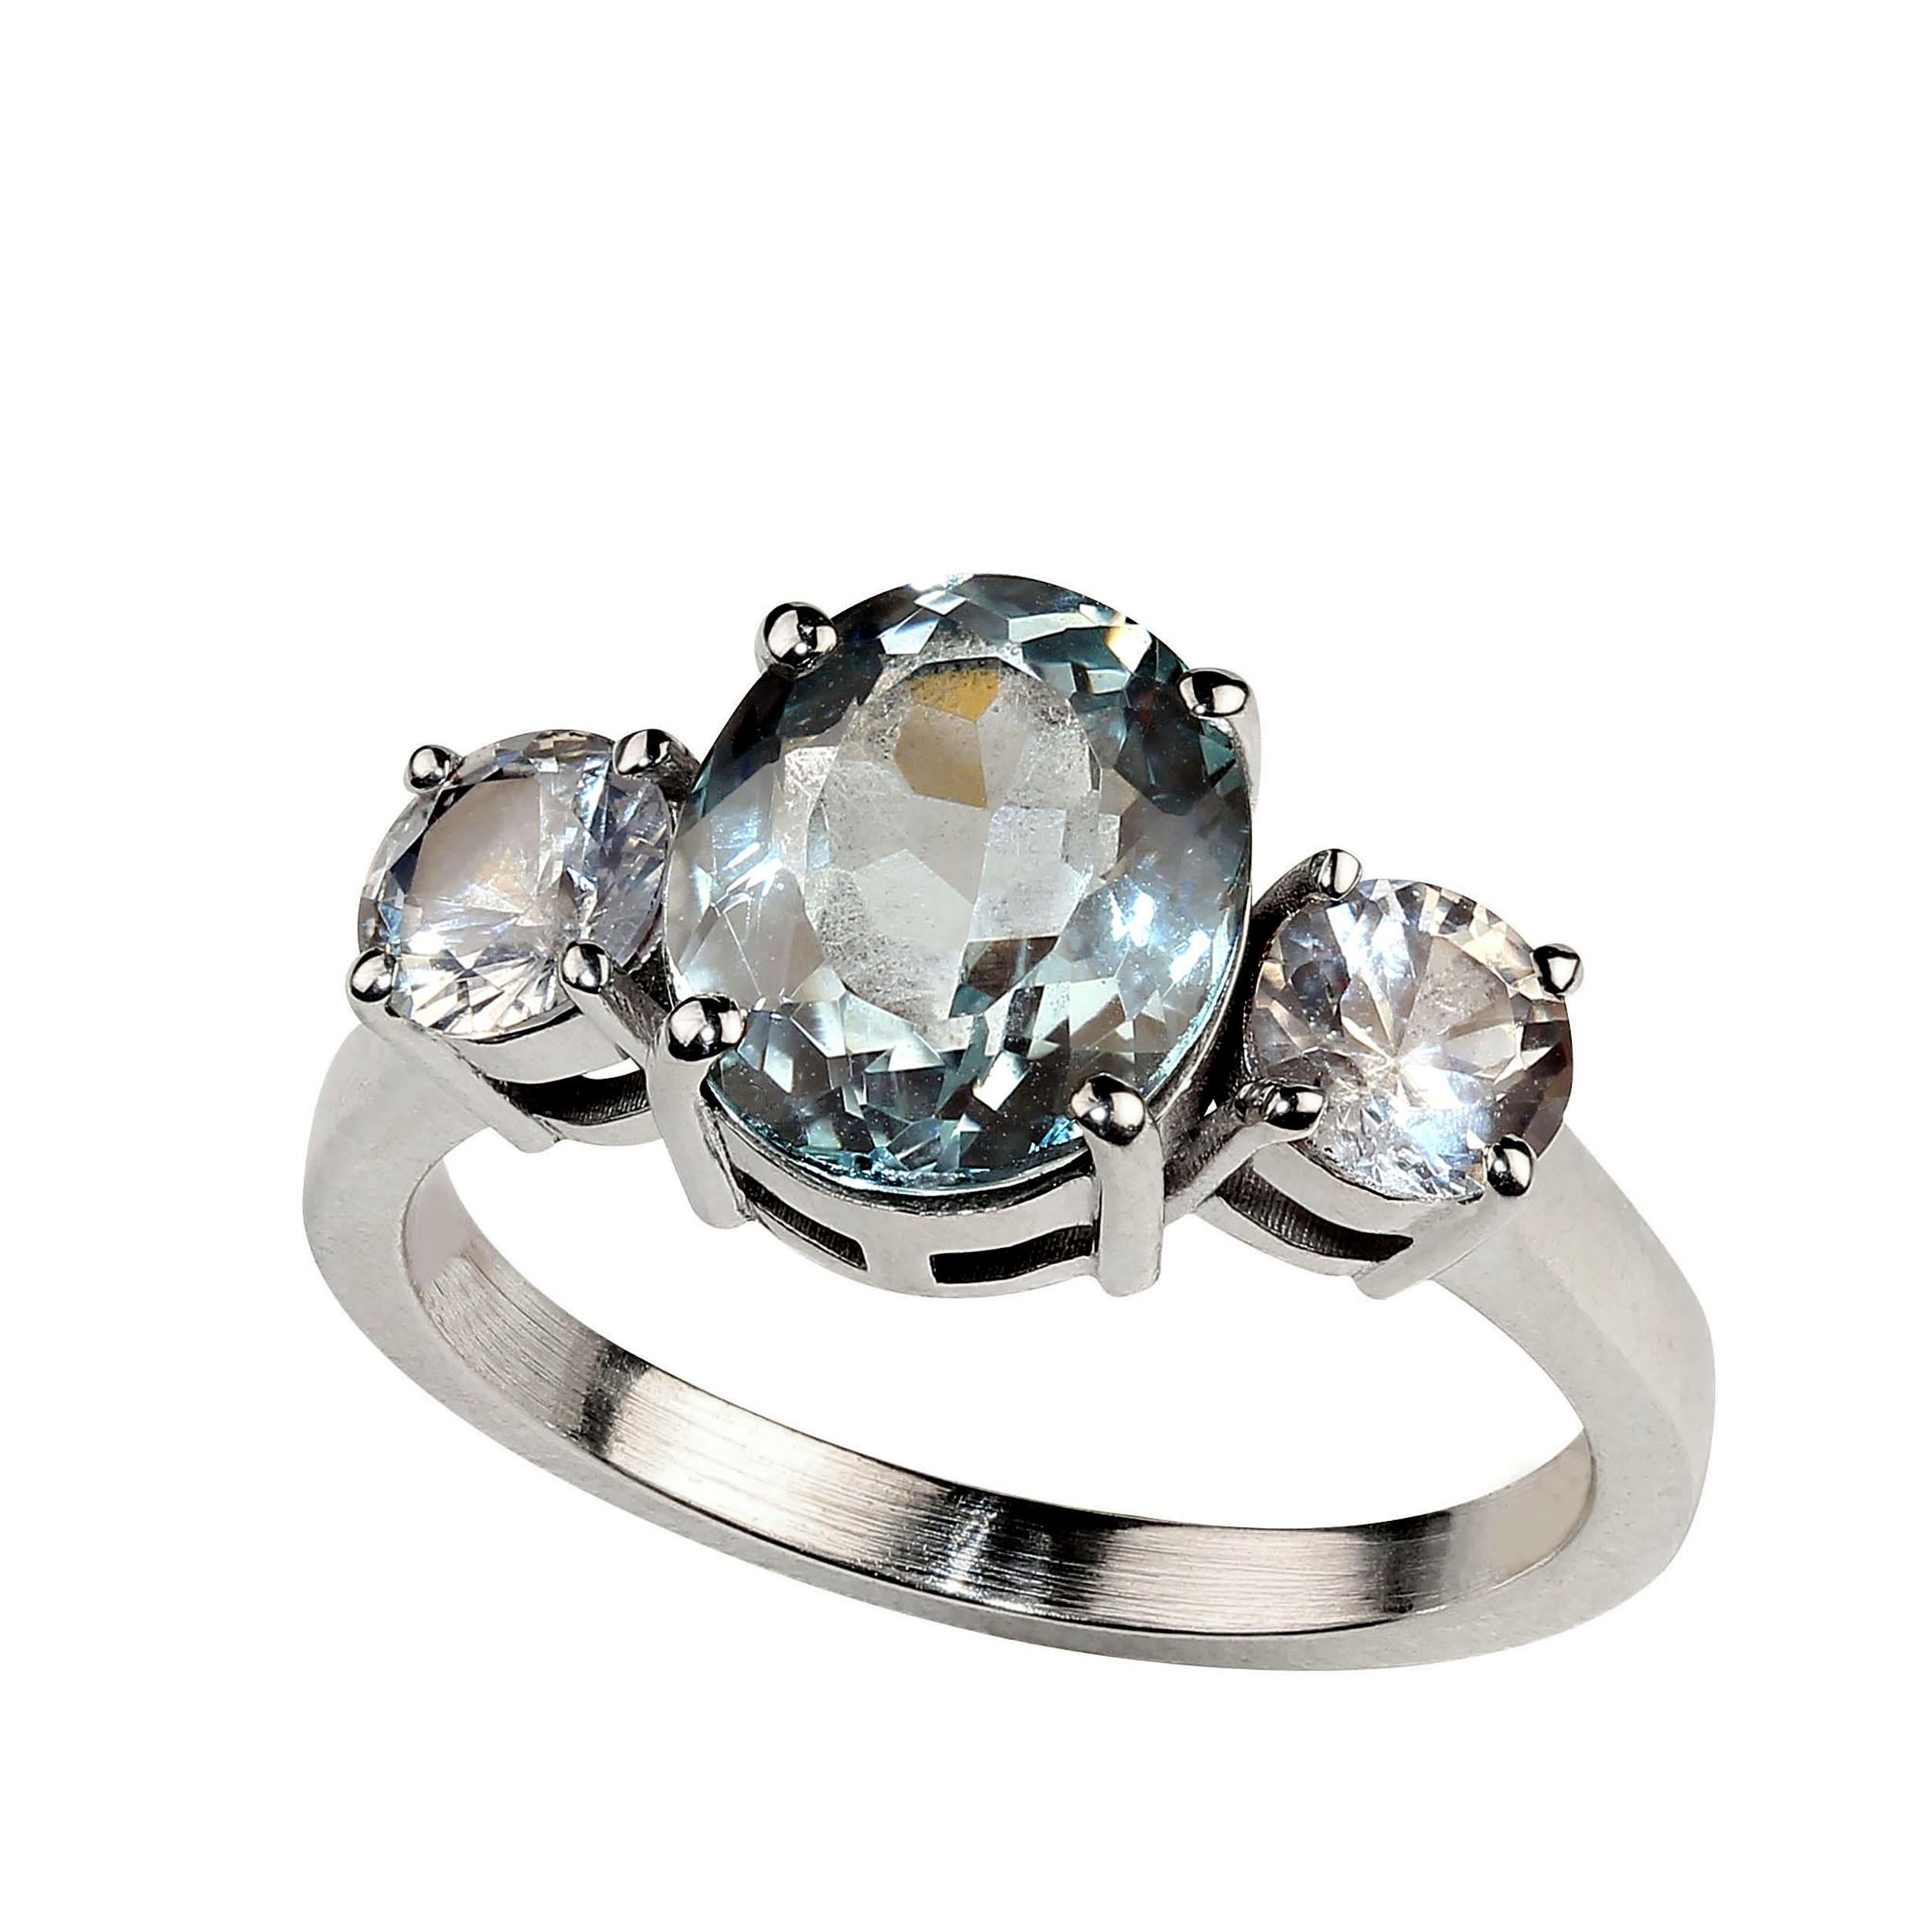 Artisan AJD Delicate 3 Carat Oval Aquamarine Accented by White Sapphires Ring